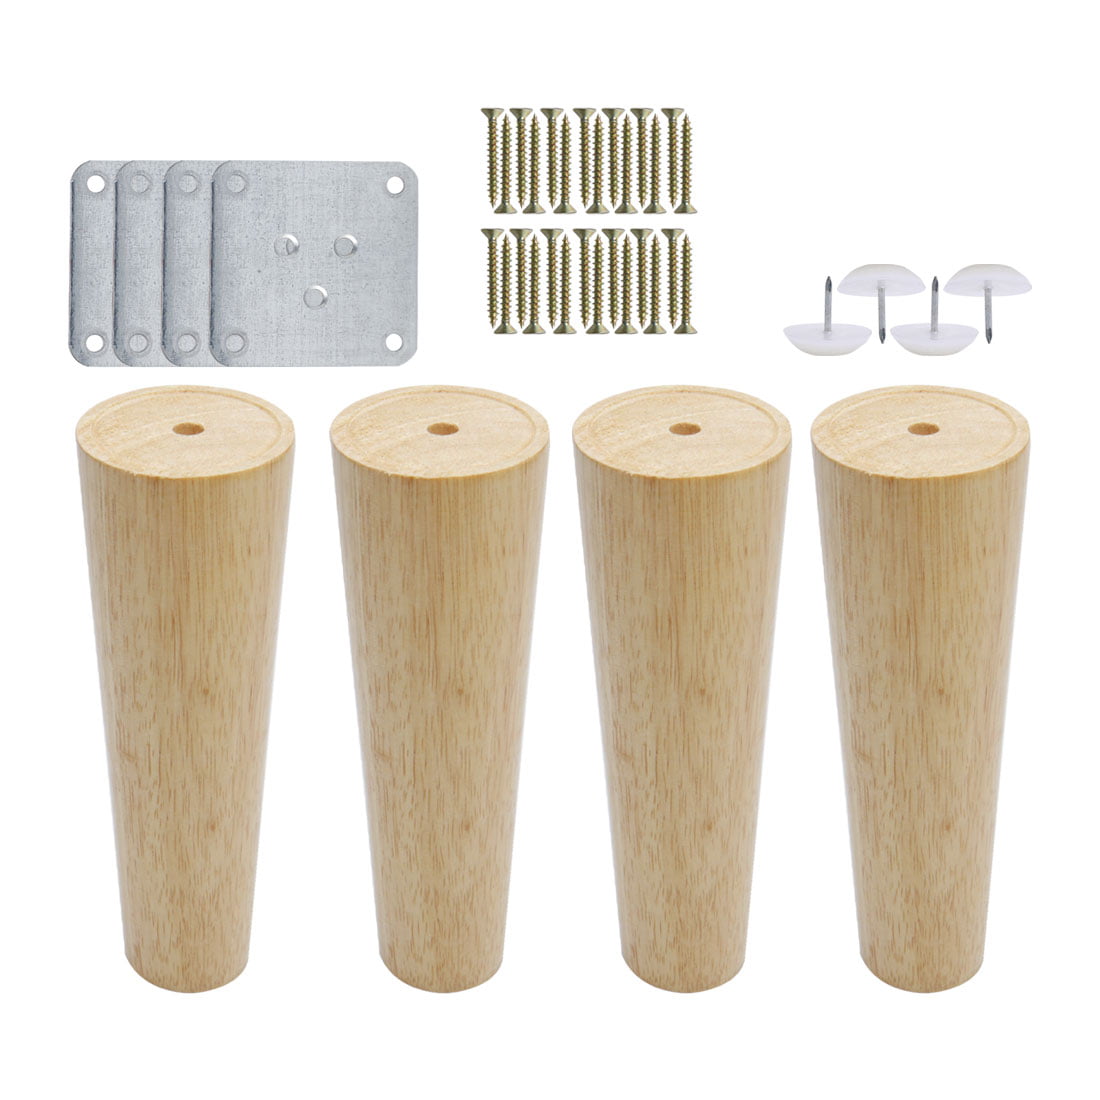 uxcell 4 Inch Round Wood Furniture Legs Sofa Couch Chair Table Desk Cupboard Closet Cabinet Bench Feet Replacement Set of 4